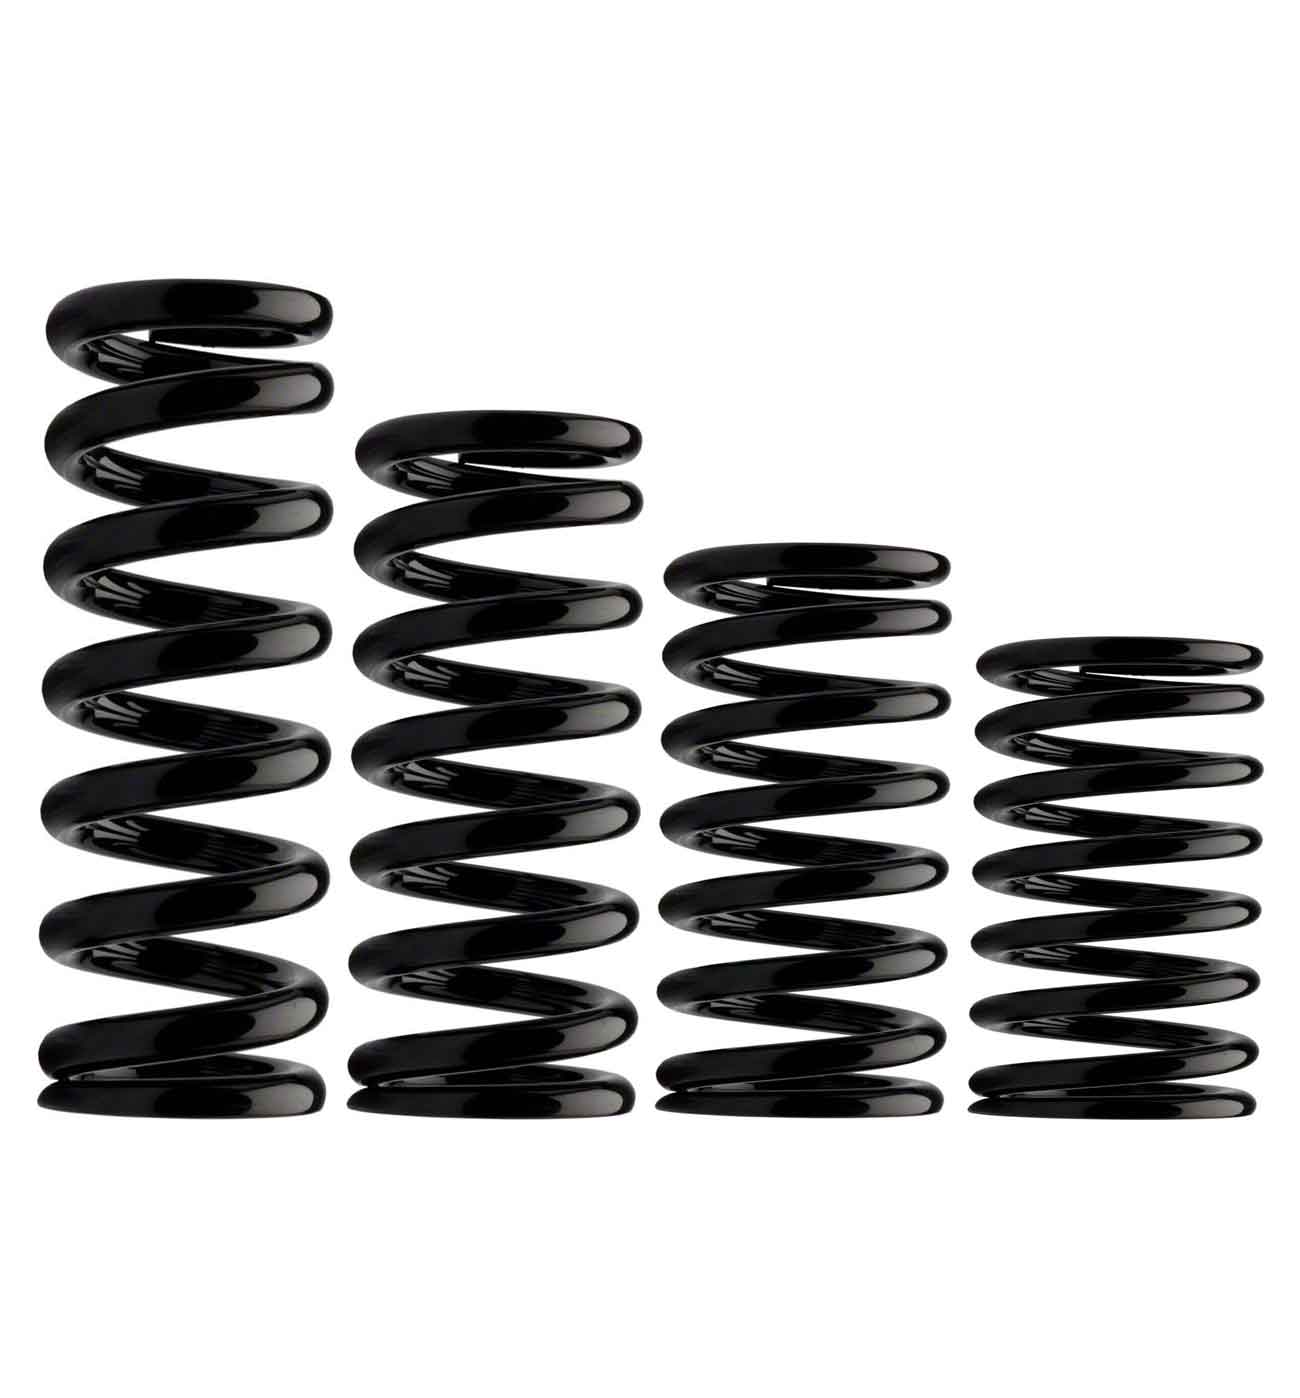 Faulkner's Race/Racing/Rally/Competition/Suspension Coilover Spring 2.5" 